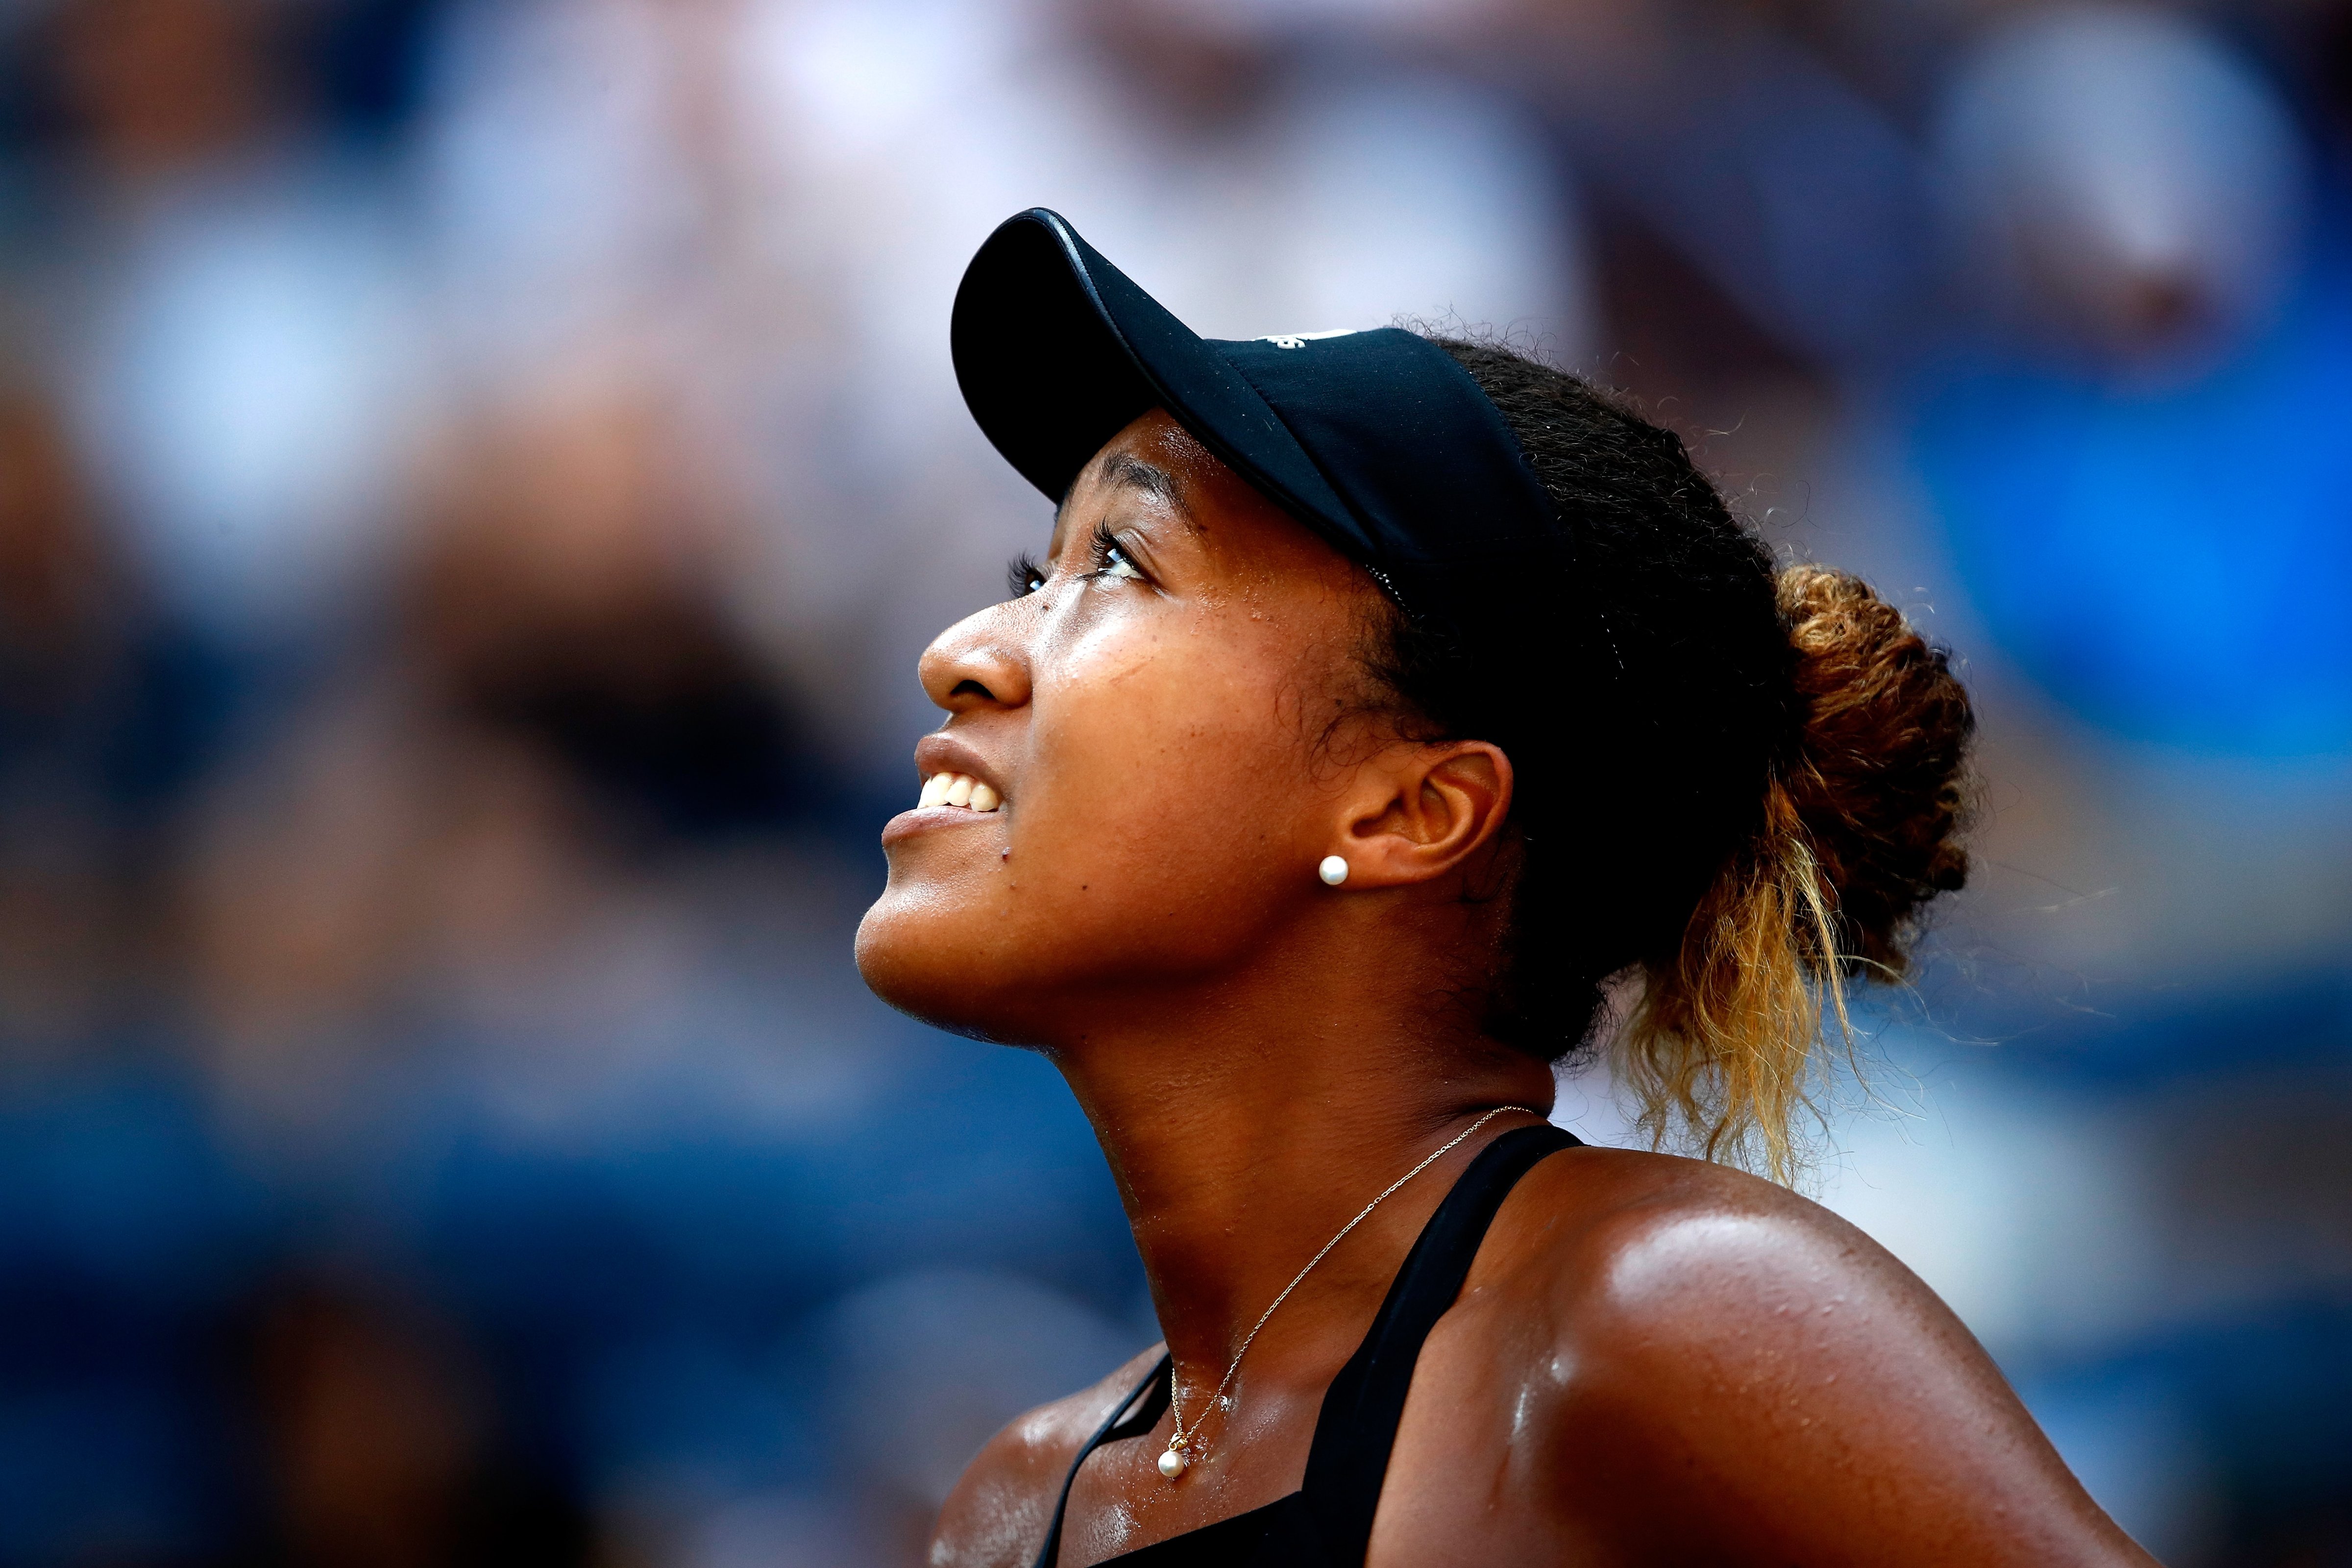 Naomi Osaka of Japan looks on during the women's singles fourth round match against Aryna Sabalenka of Belarus on Day Eight of the 2018 U.S. Open at the USTA Billie Jean King National Tennis Center on Sept. 3, 2018. (Julian Finney&mdash;Getty Images)